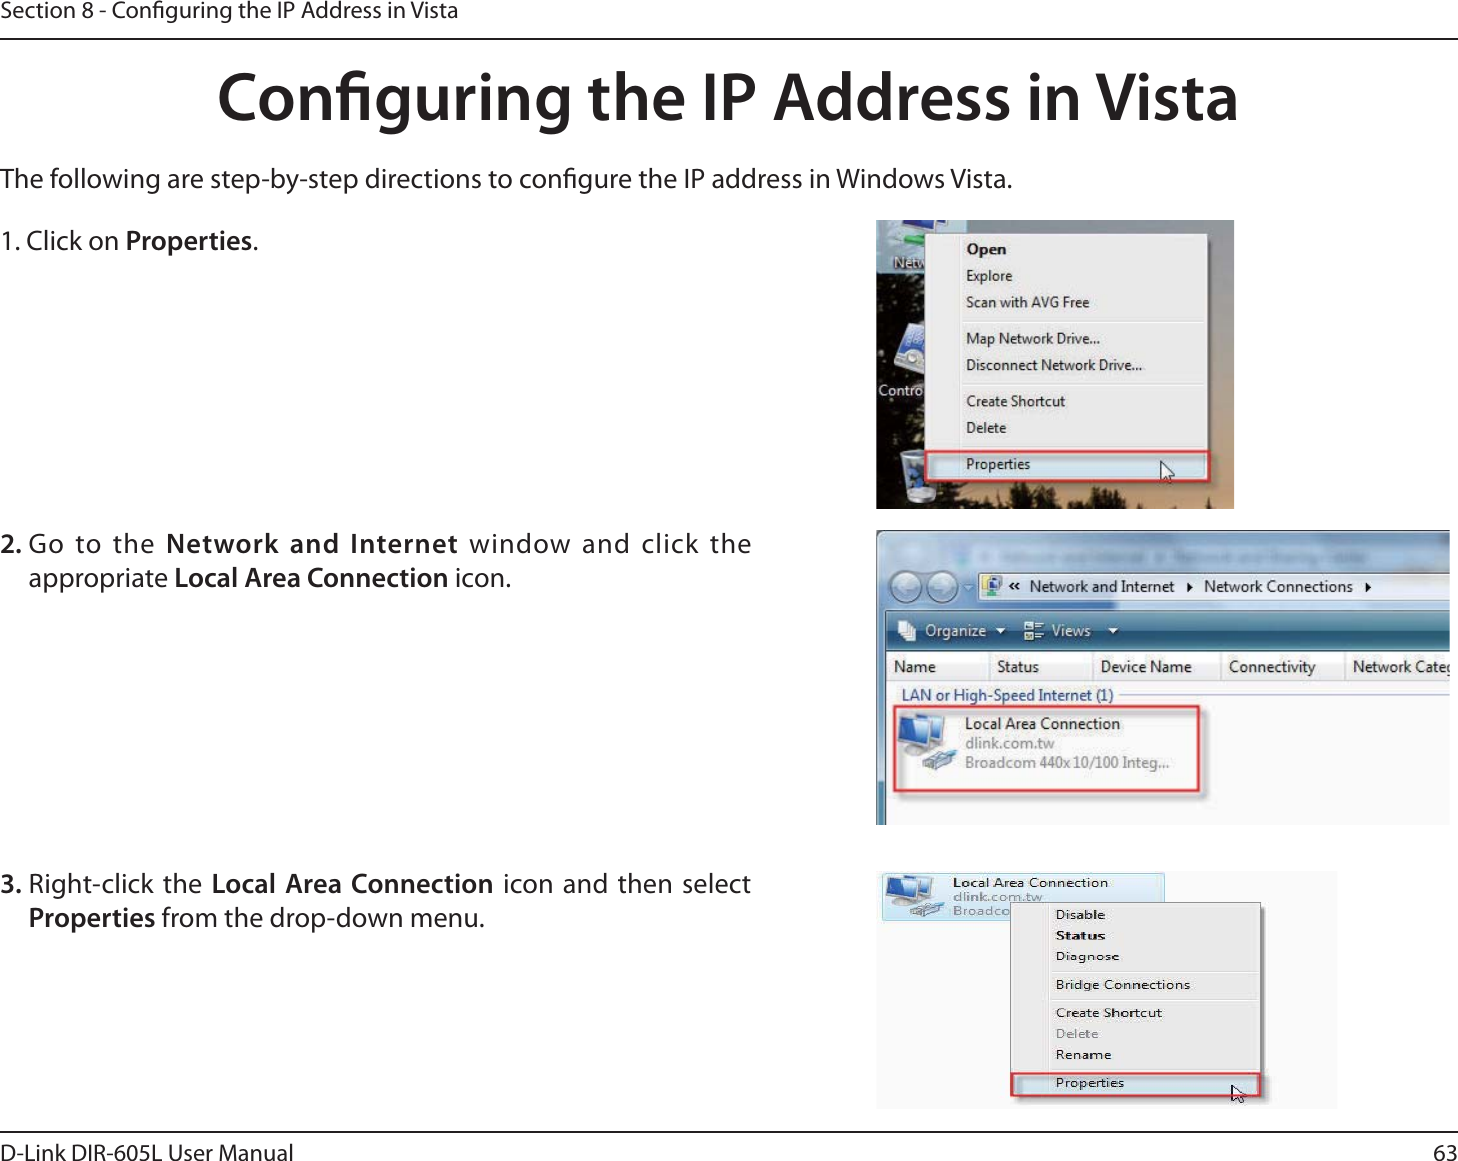 63D-Link DIR-605L User ManualSection 8 - Conguring the IP Address in VistaConguring the IP Address in VistaThe following are step-by-step directions to congure the IP address in Windows Vista.    2. Go to the Network and Internet window and click the appropriate Local Area Connection icon. 1. Click on Properties.     3. Right-click the Local Area Connection icon and then select Properties from the drop-down menu. 